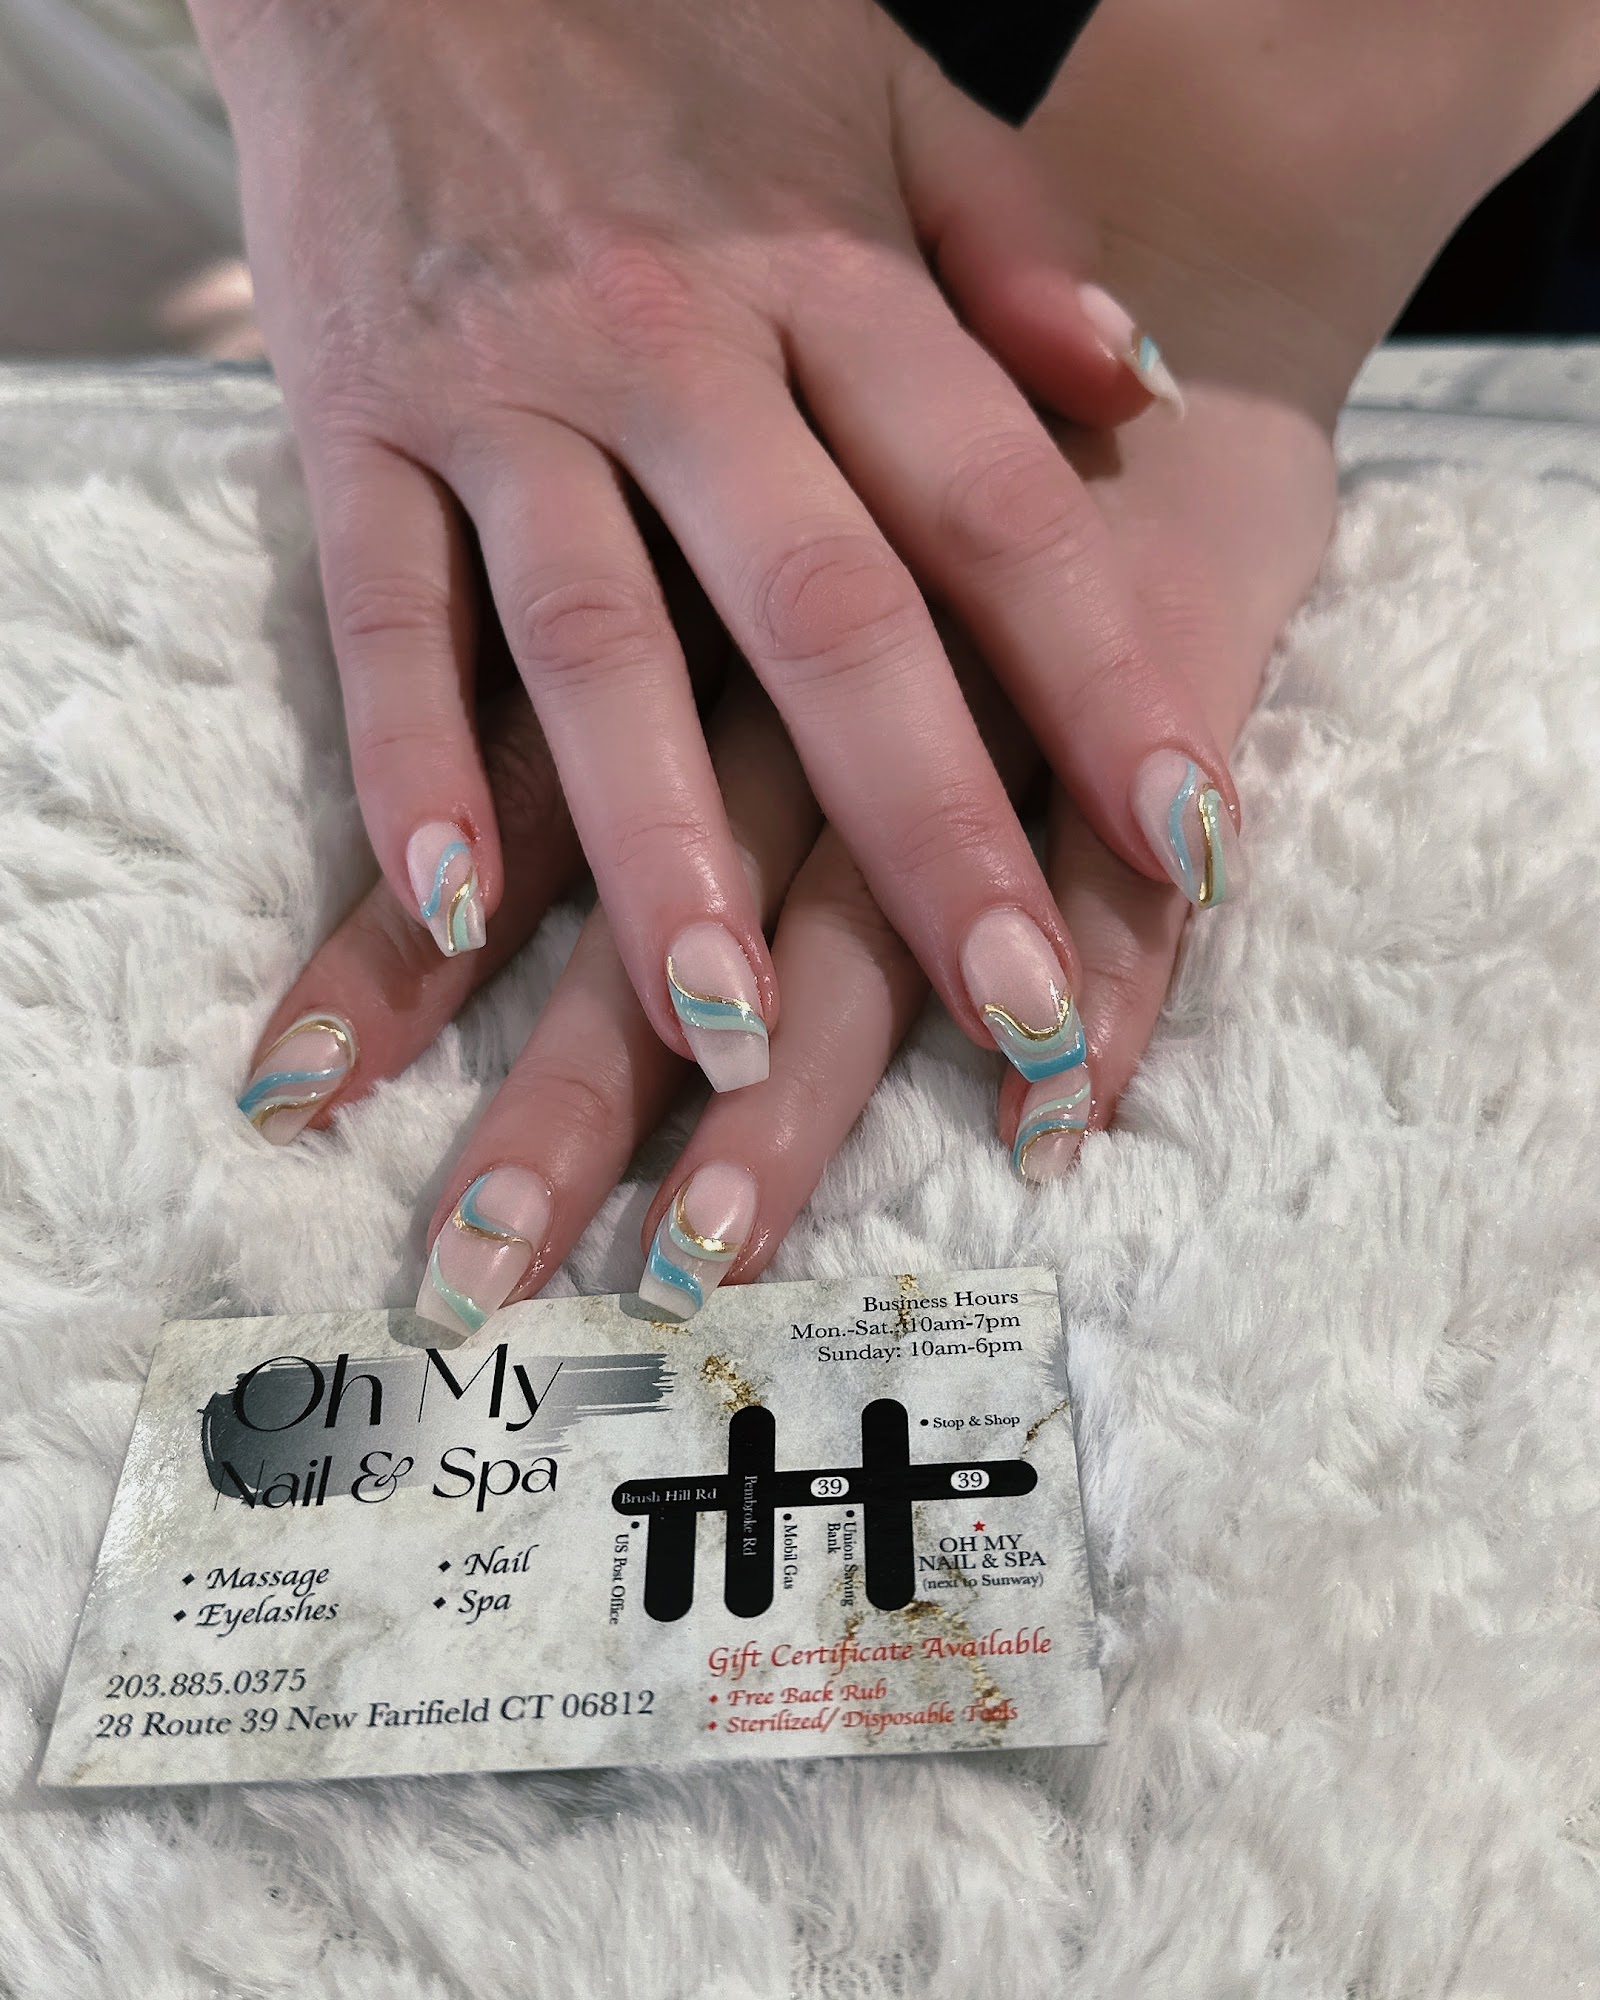 Oh My Nails 28 CT-39, New Fairfield Connecticut 06812